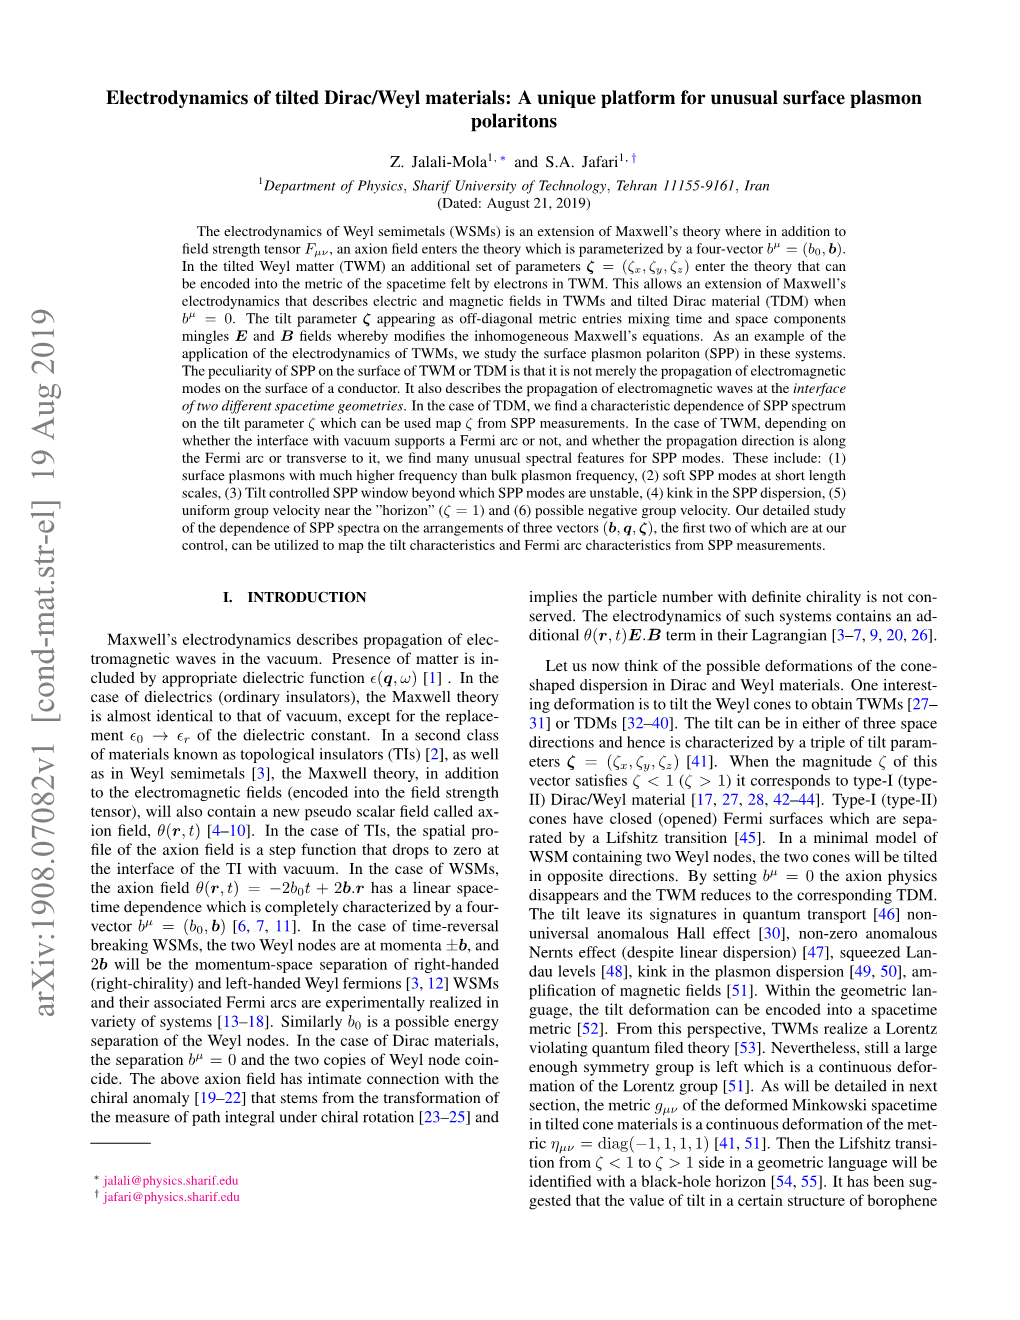 Arxiv:1908.07082V1 [Cond-Mat.Str-El] 19 Aug 2019 Guage, the Tilt Deformation Can Be Encoded Into a Spacetime Variety of Systems [13–18]